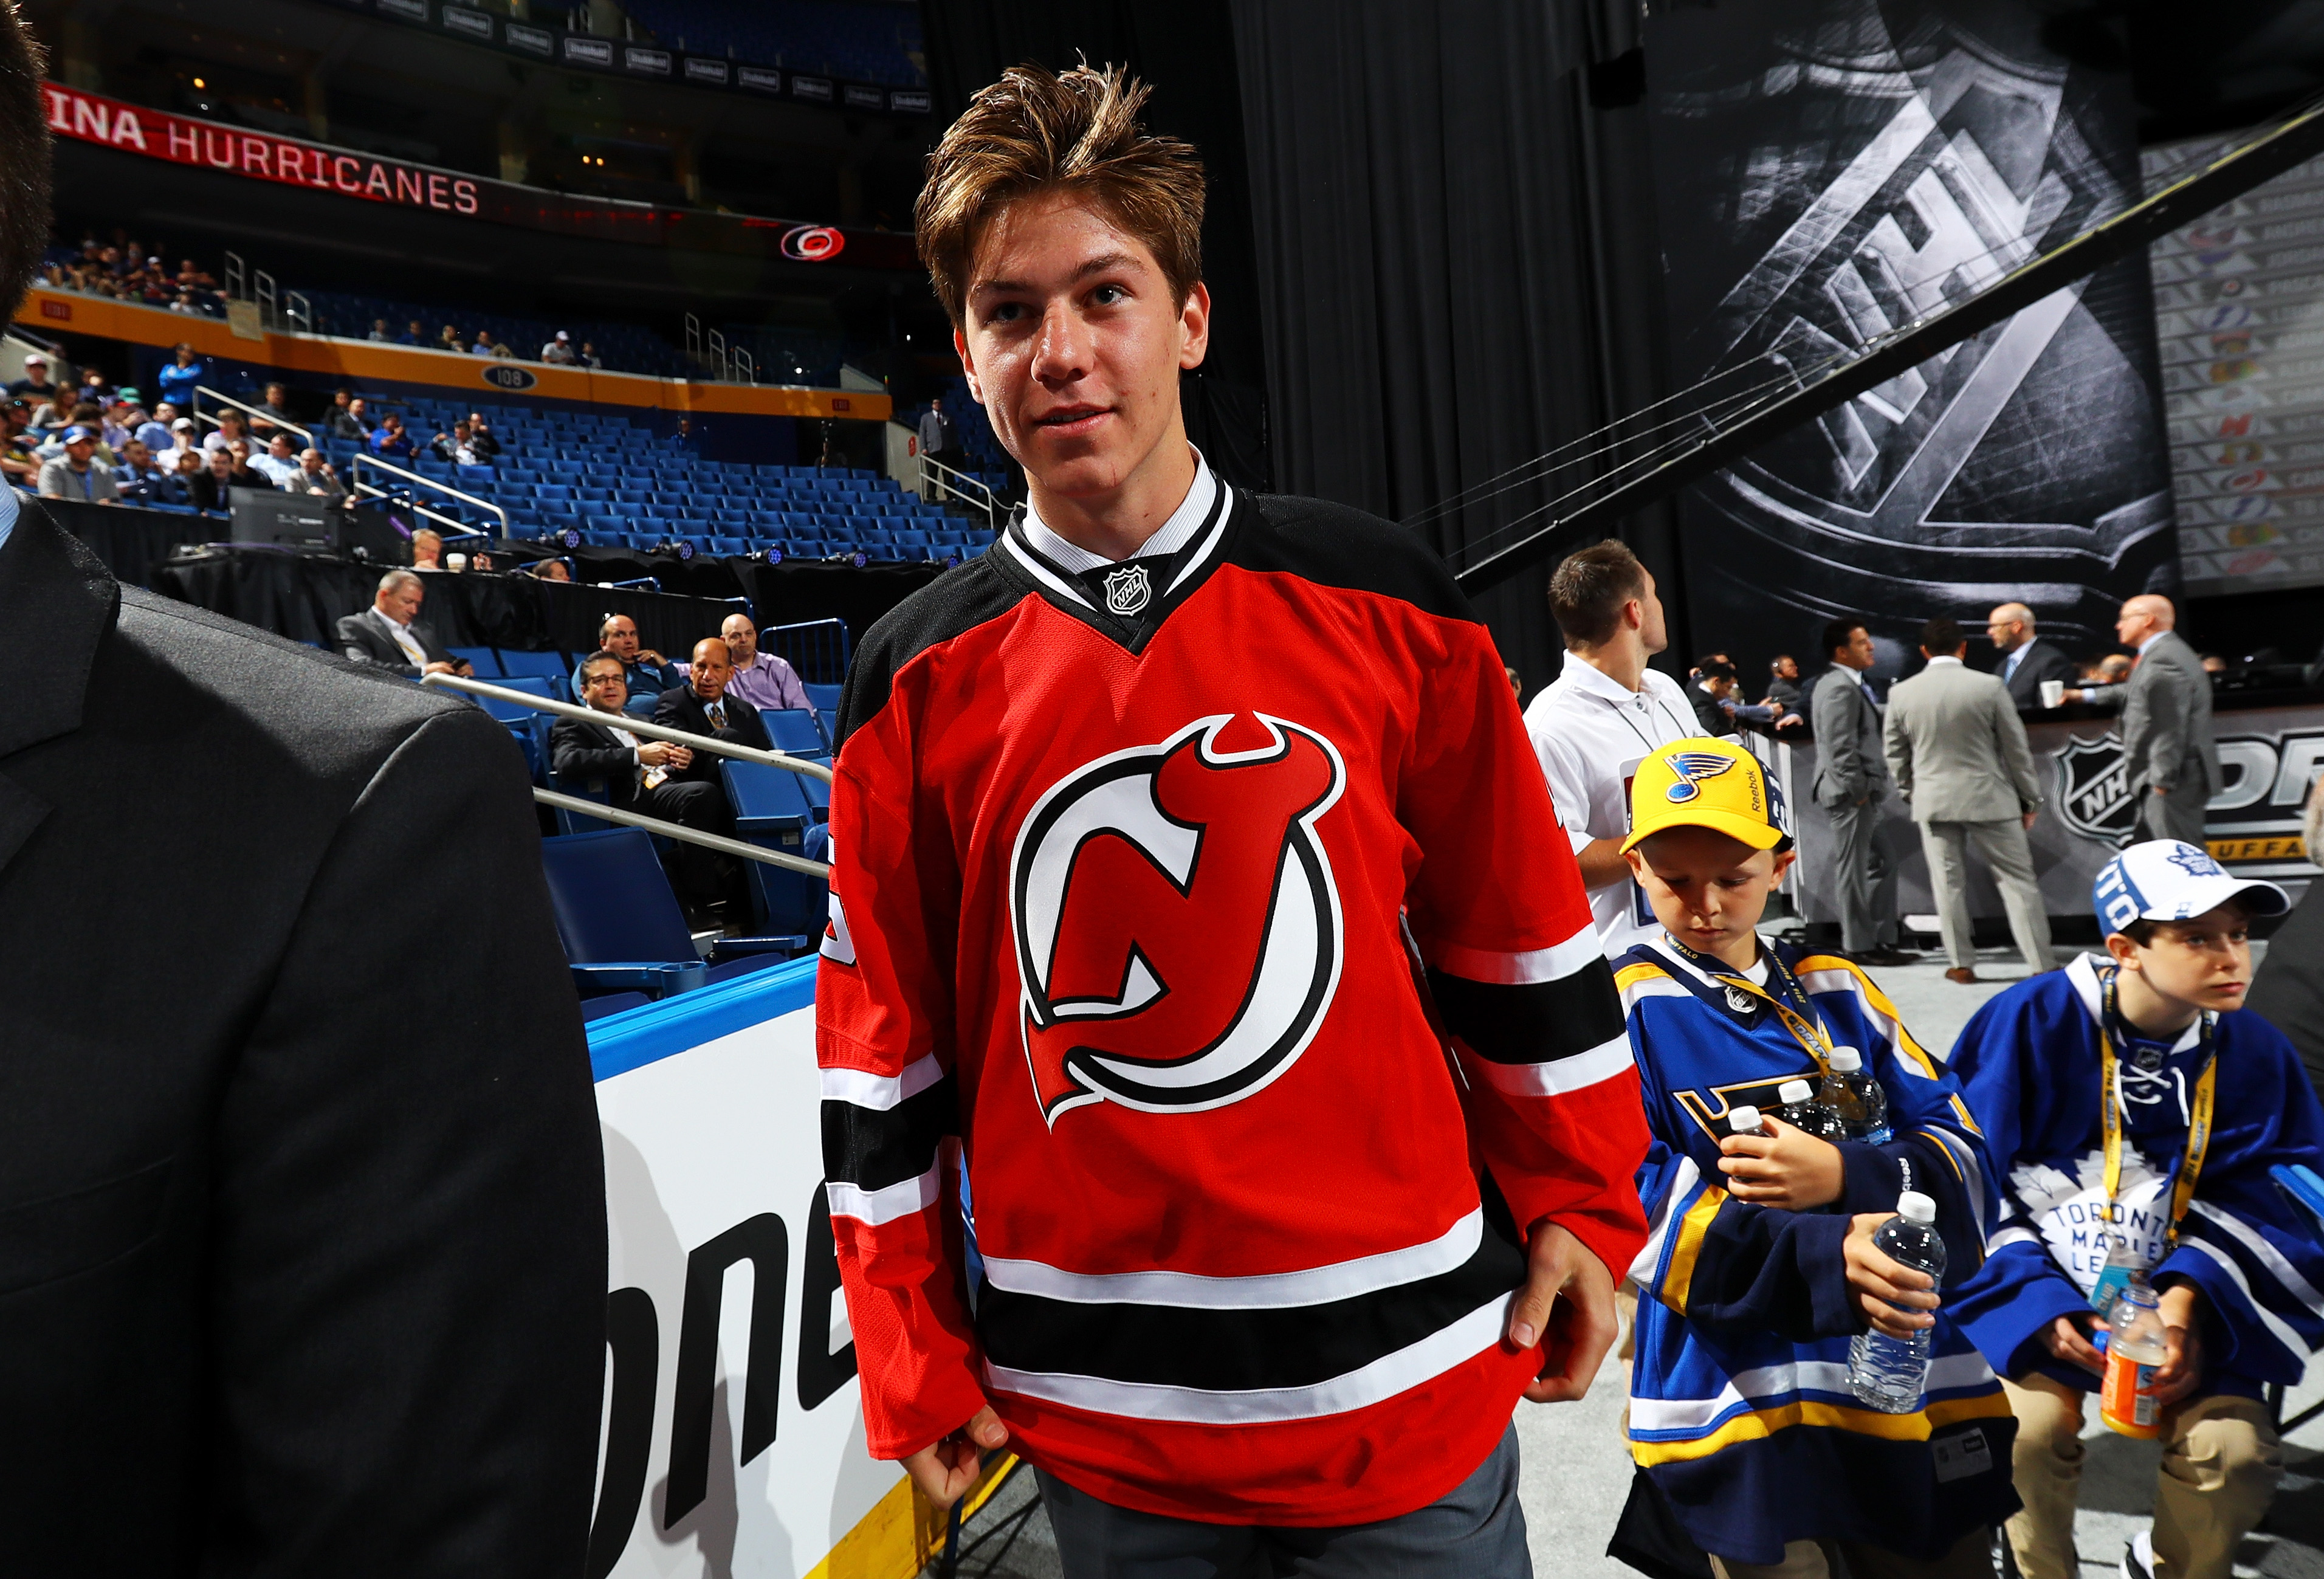 Nathan Bastian was in Buffalo and now has a new New Jersey Devils jersey to show for his efforts. Welcome to NJ.